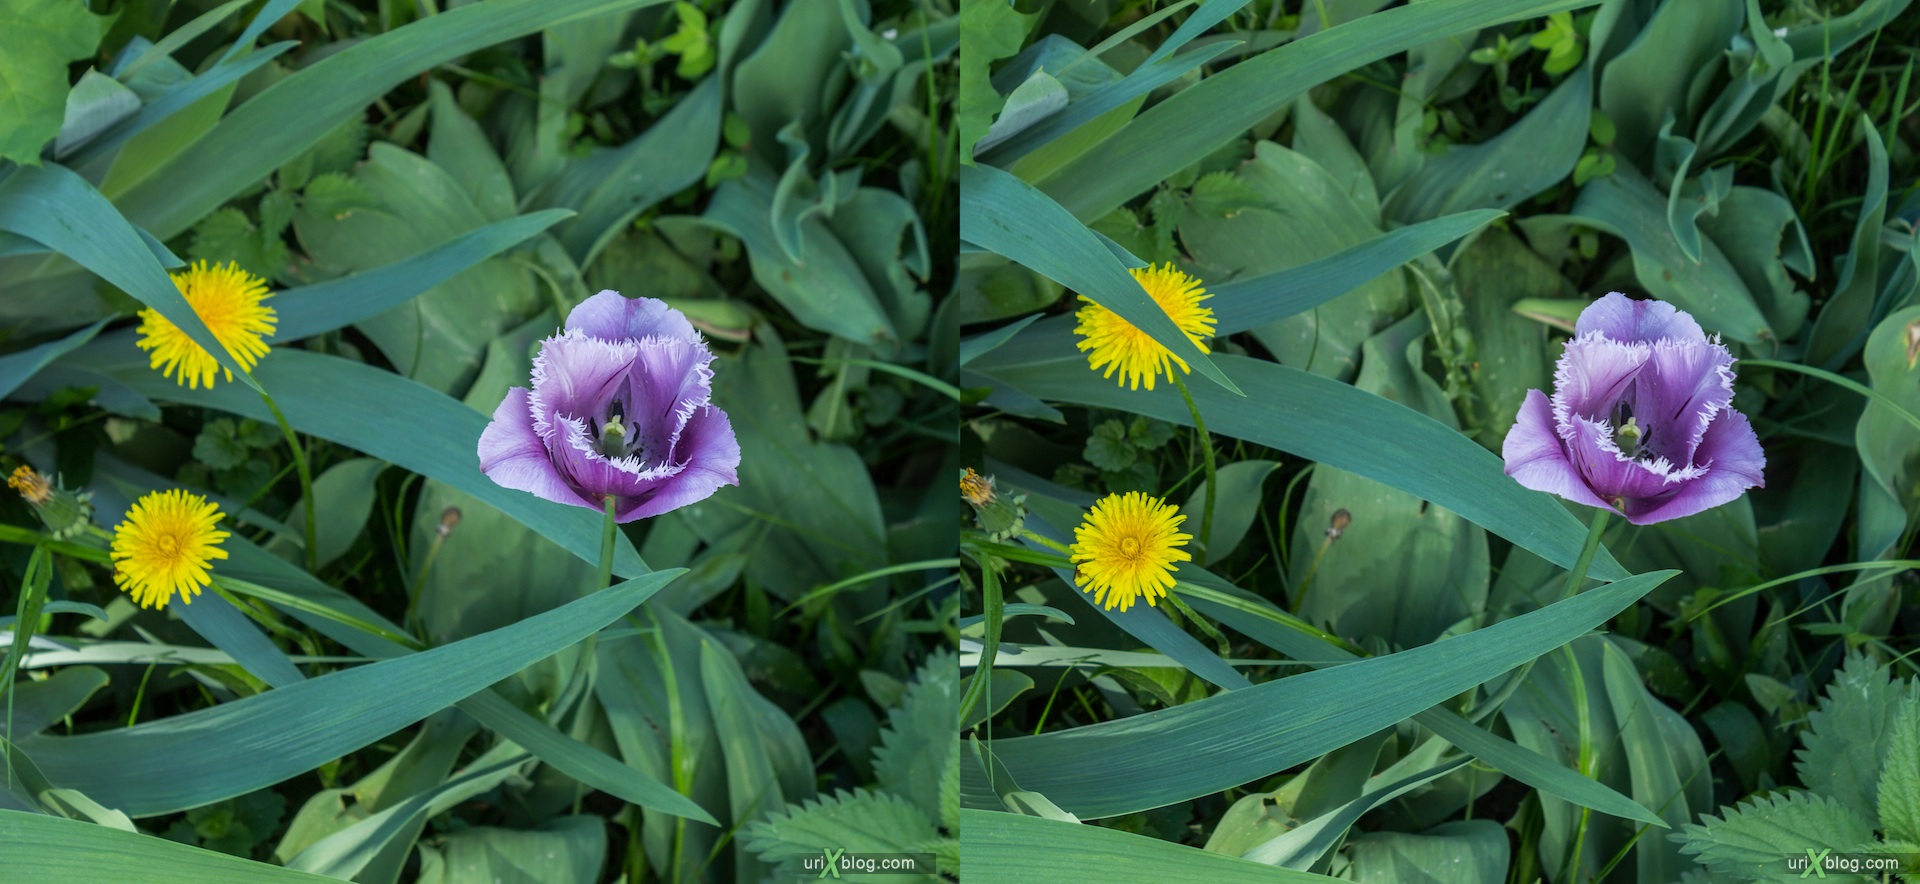 2013, tulip, dandelions, flower, grass, park, field, Moscow, Russia, spring, 3D, stereo pair, cross-eyed, crossview, cross view stereo pair, stereoscopic